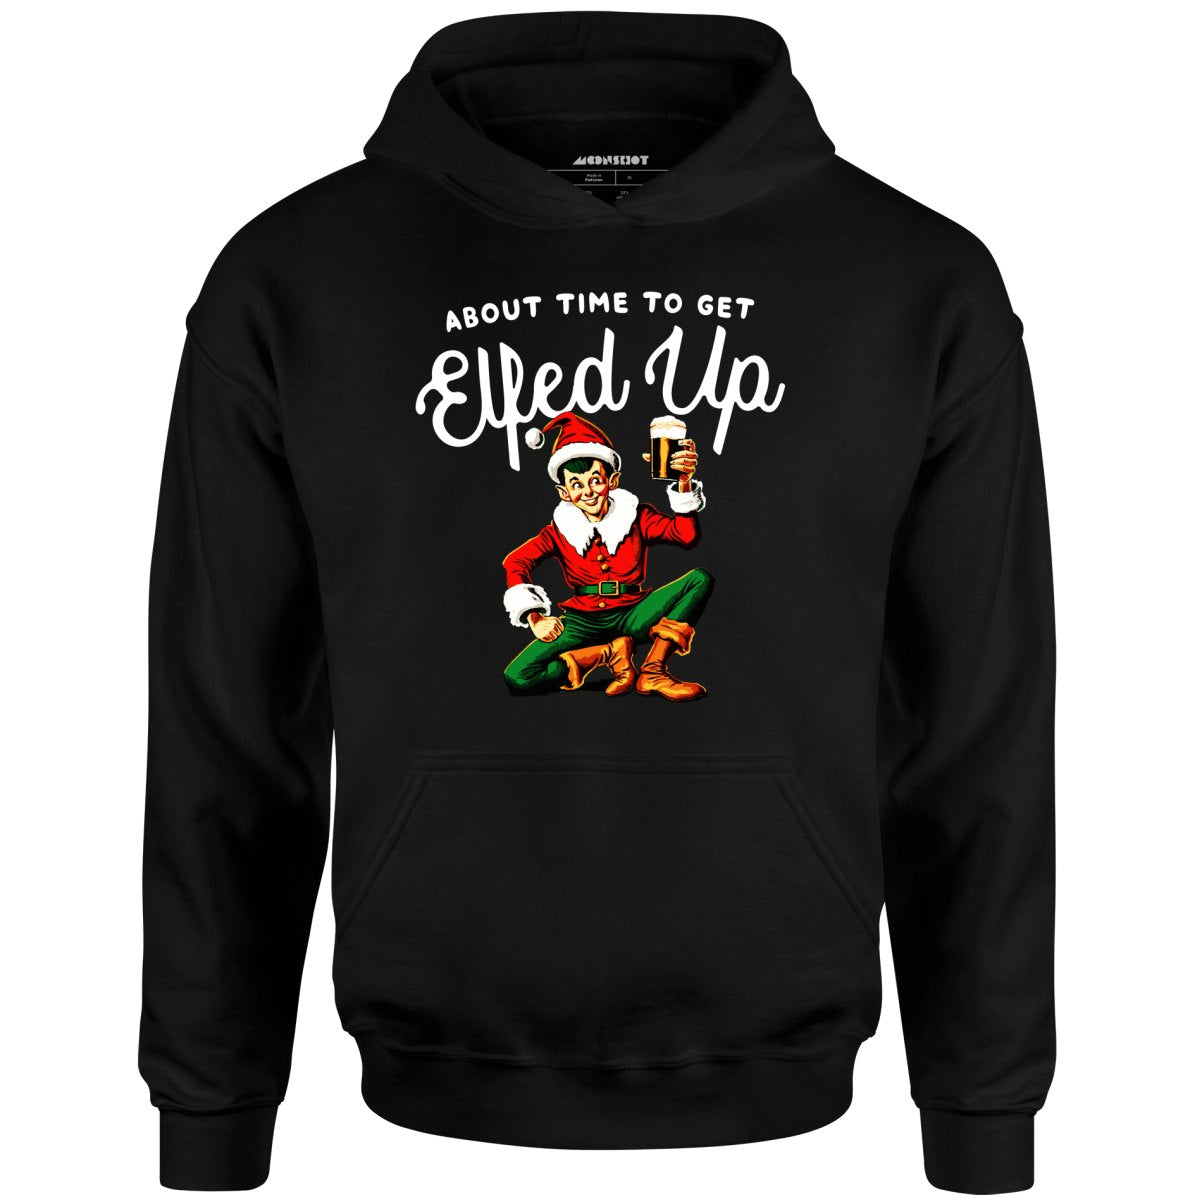 About Time to Get Elfed Up - Unisex Hoodie